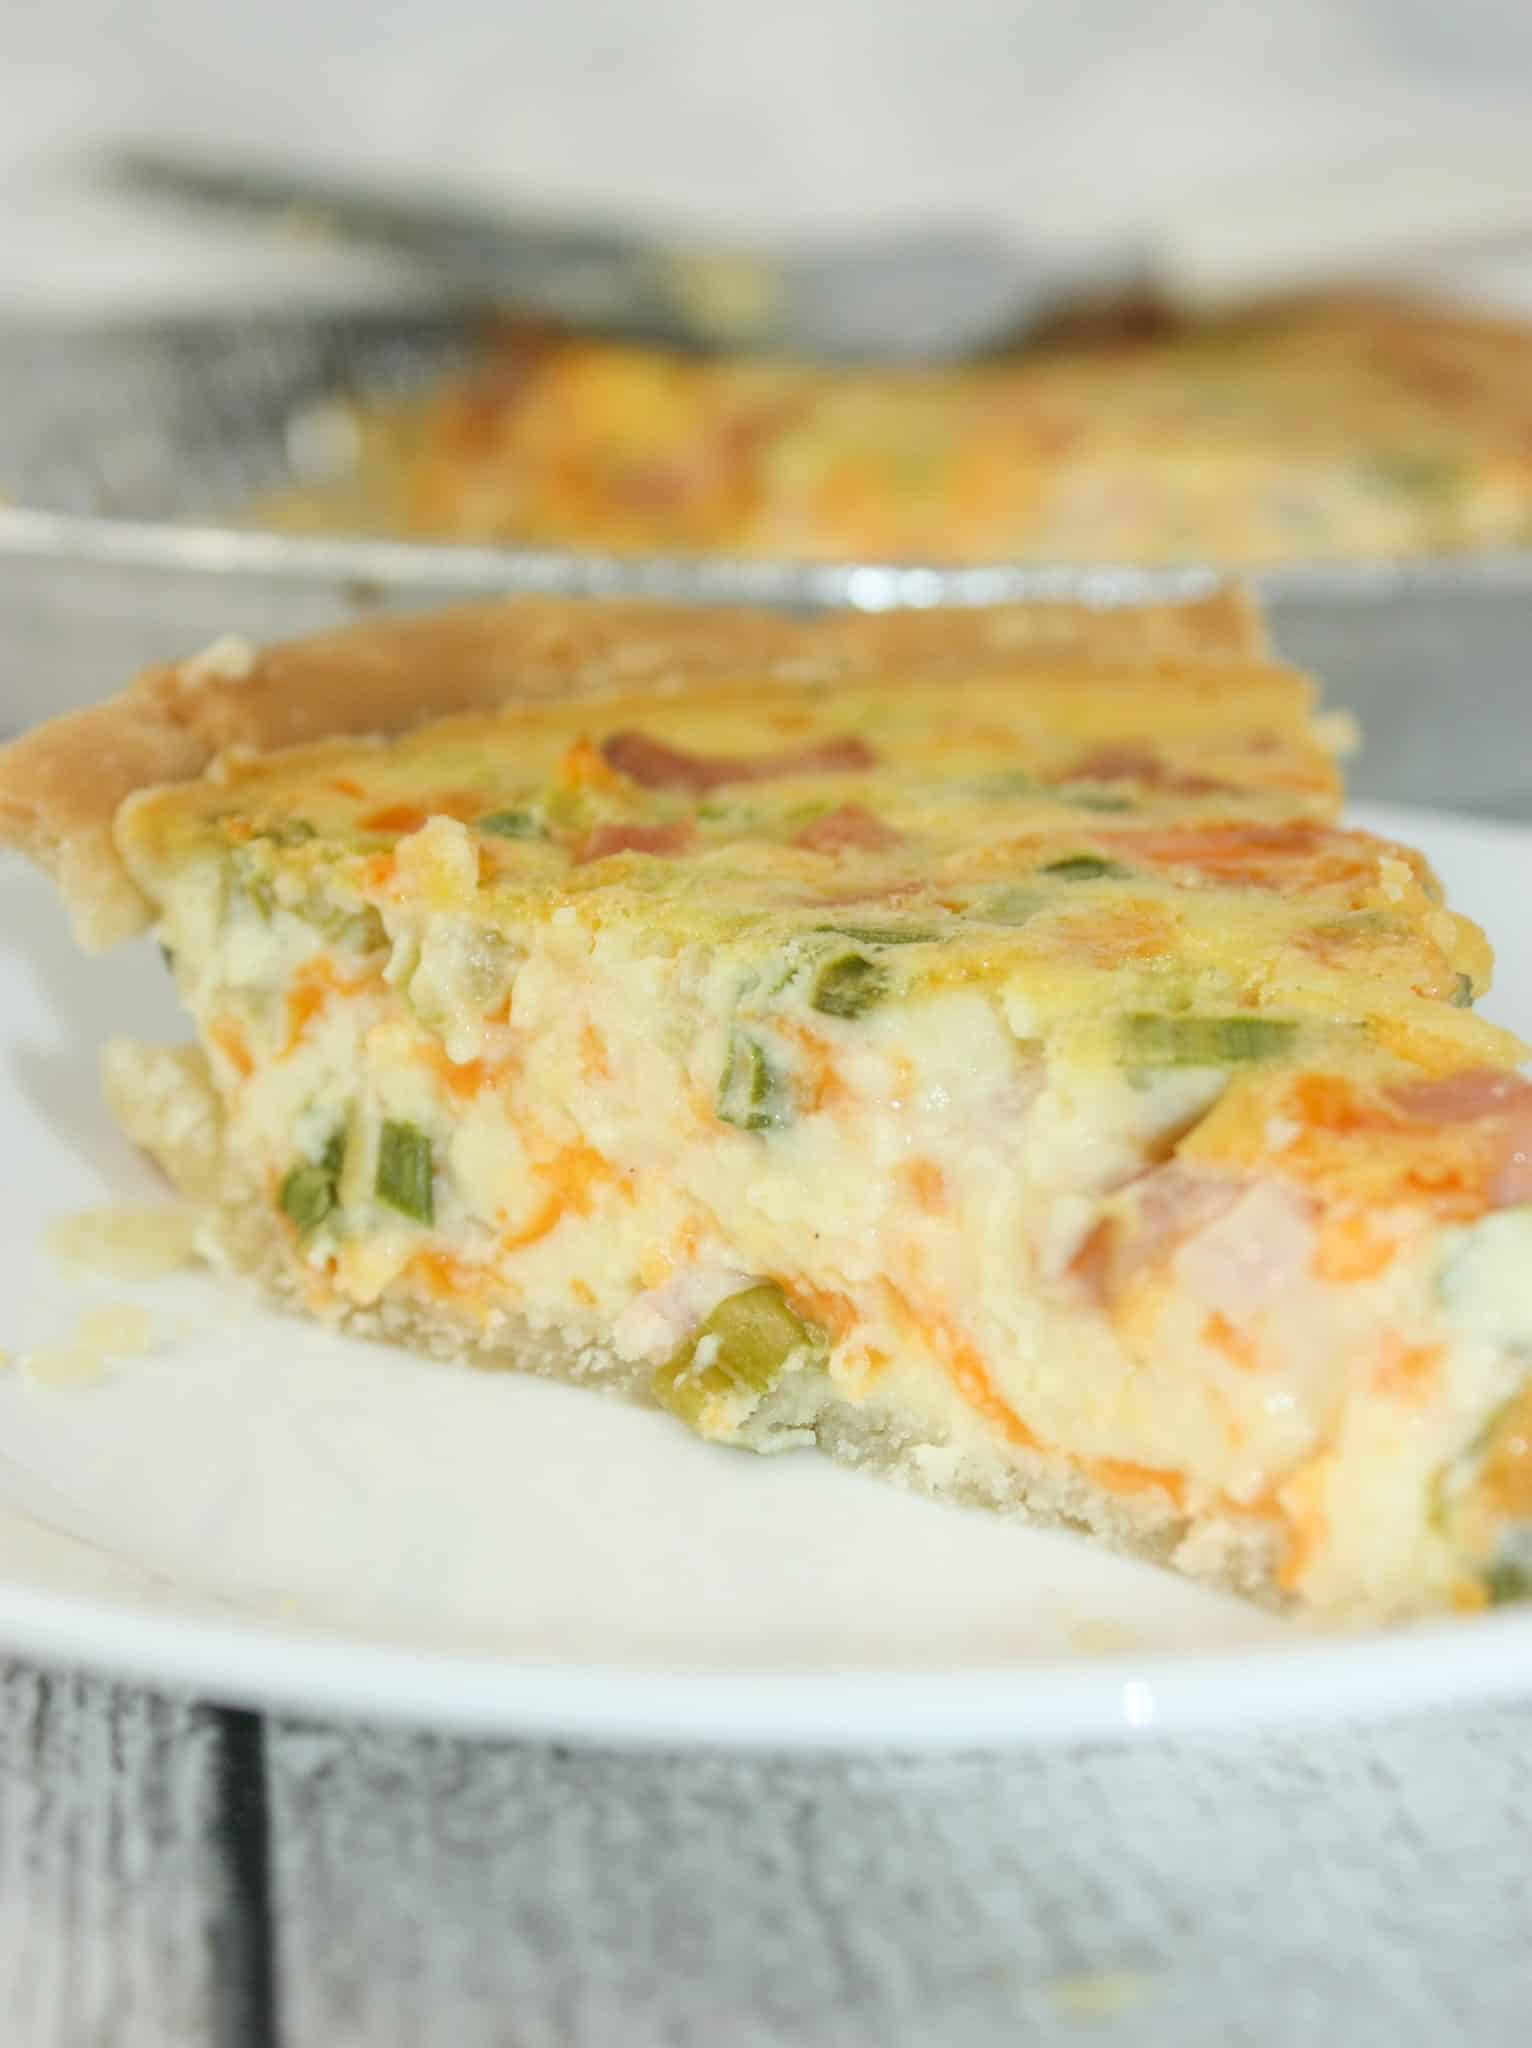 If you are looking for an easy quiche recipe, for your next brunch or light dinner, this is the perfect recipe for you!  This tasty Ham and Cheese Quiche is easy to make gluten free with your choice of pie shell.